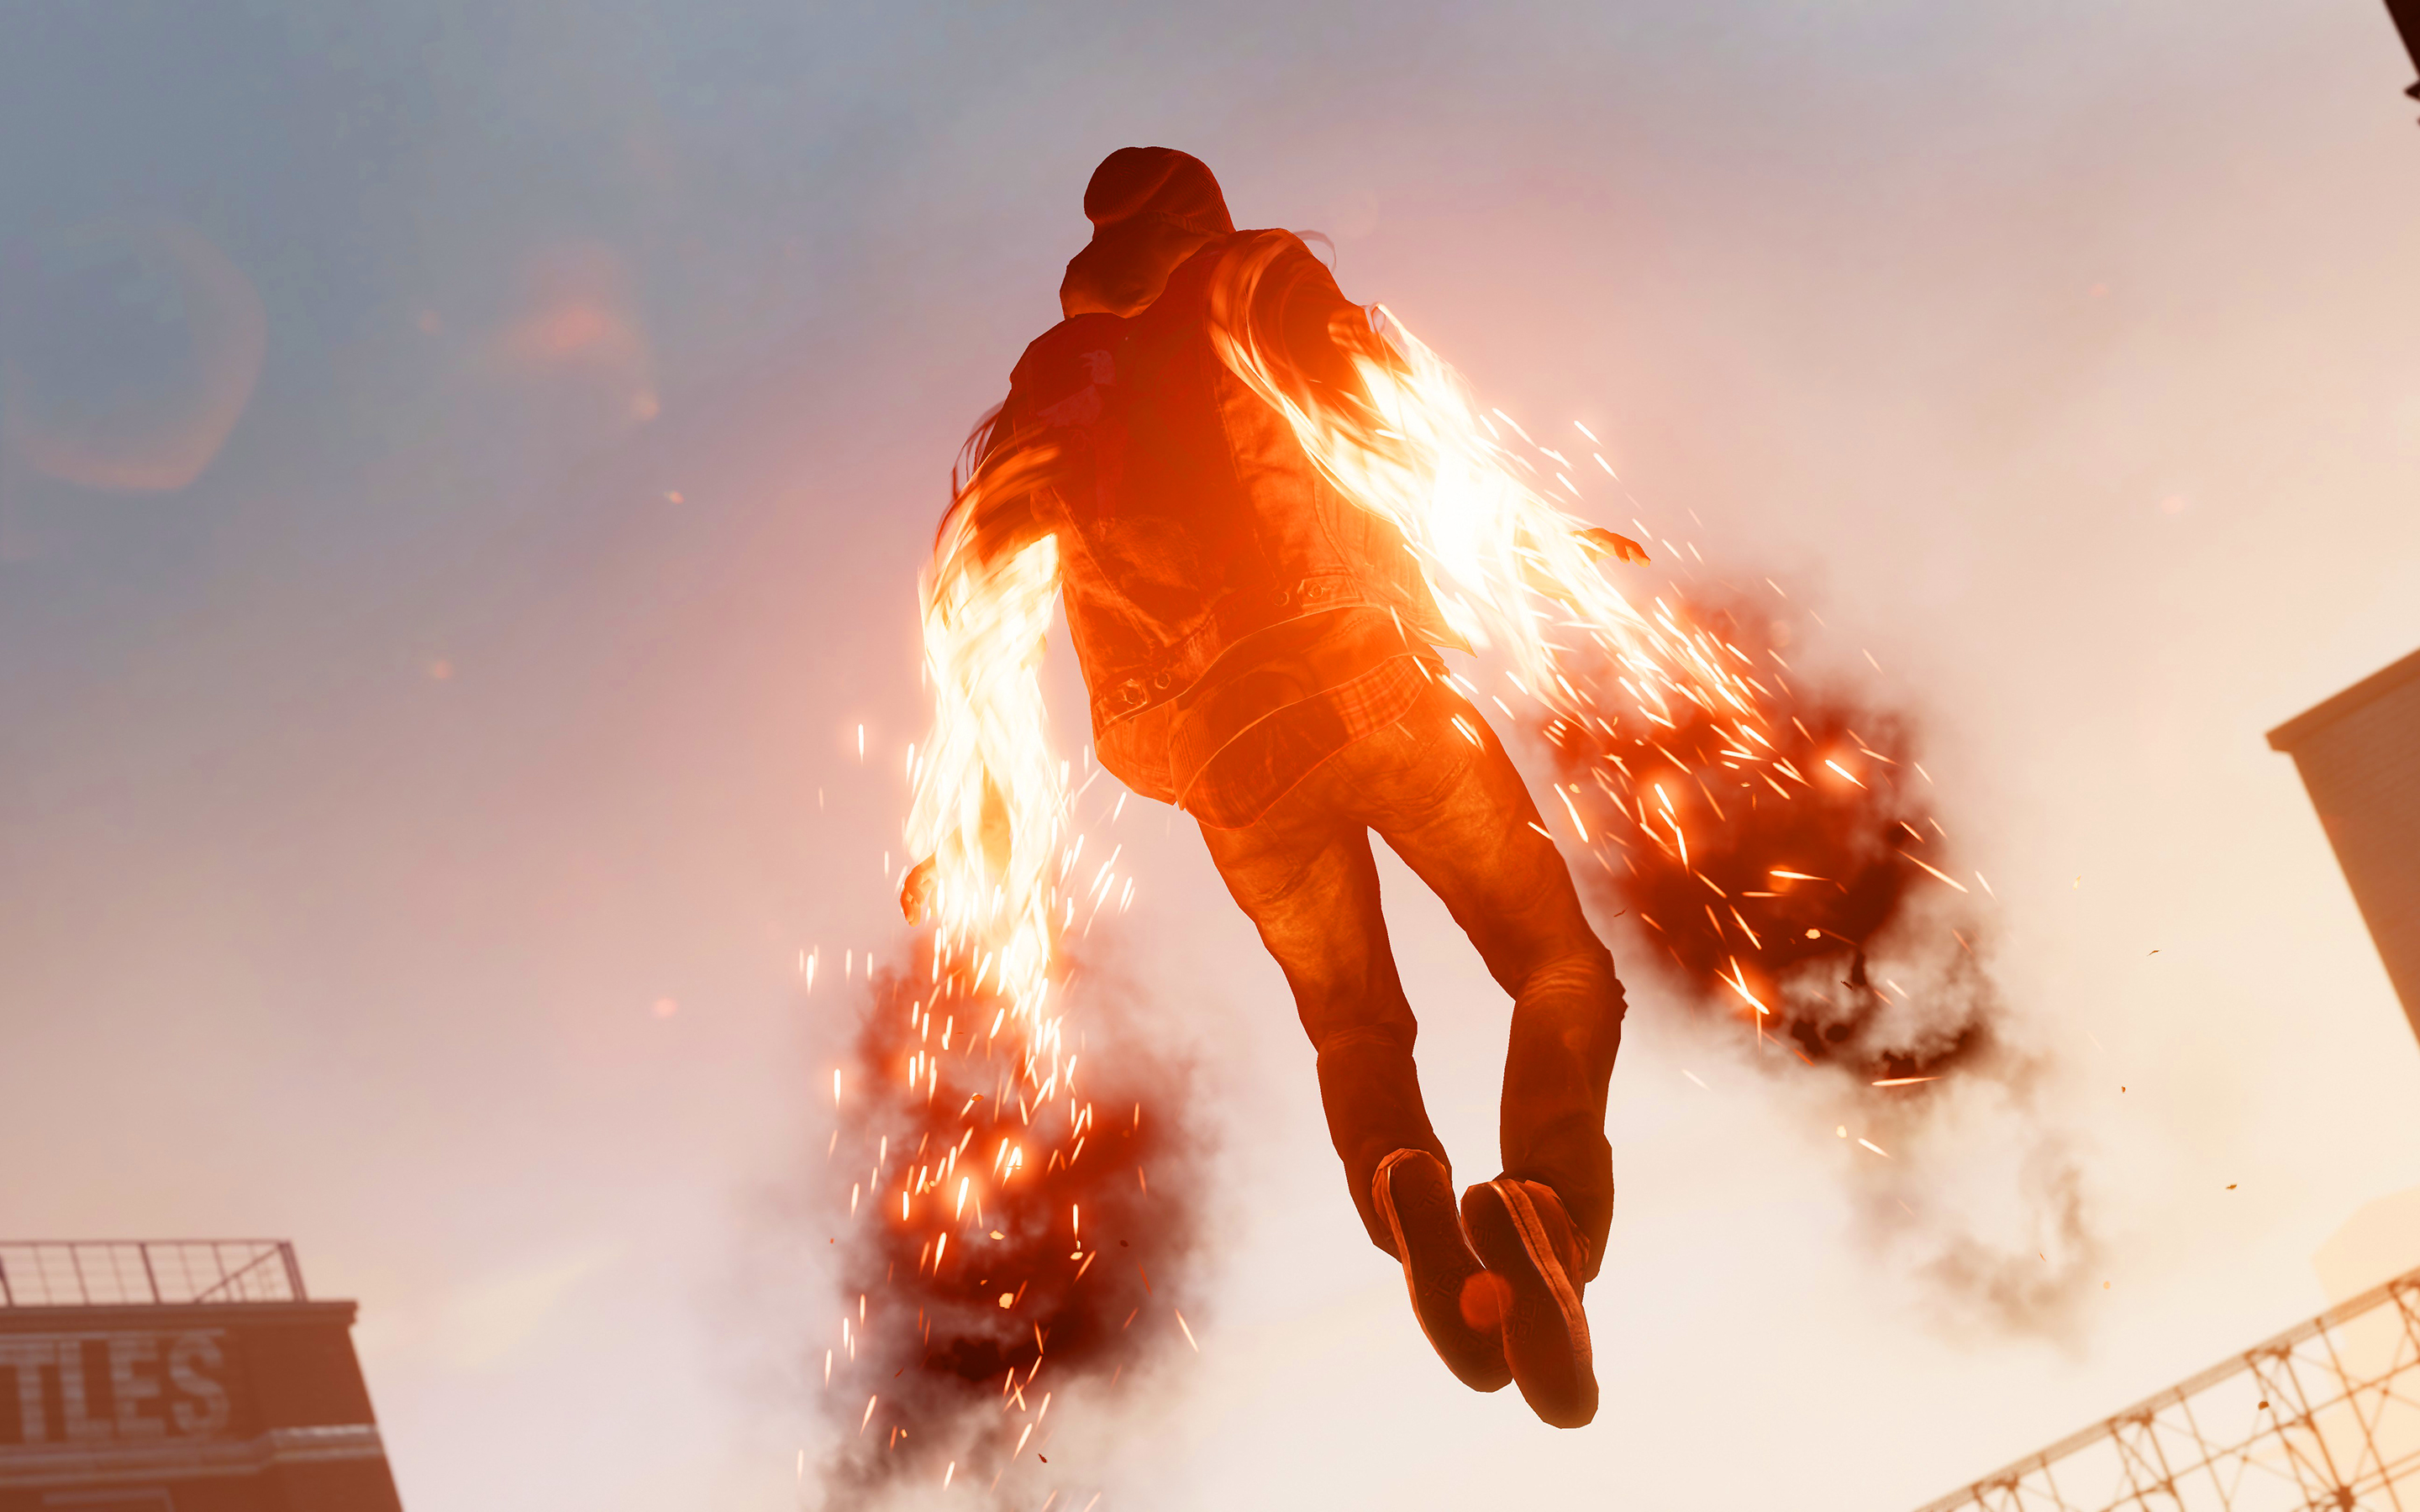 infamous second son game